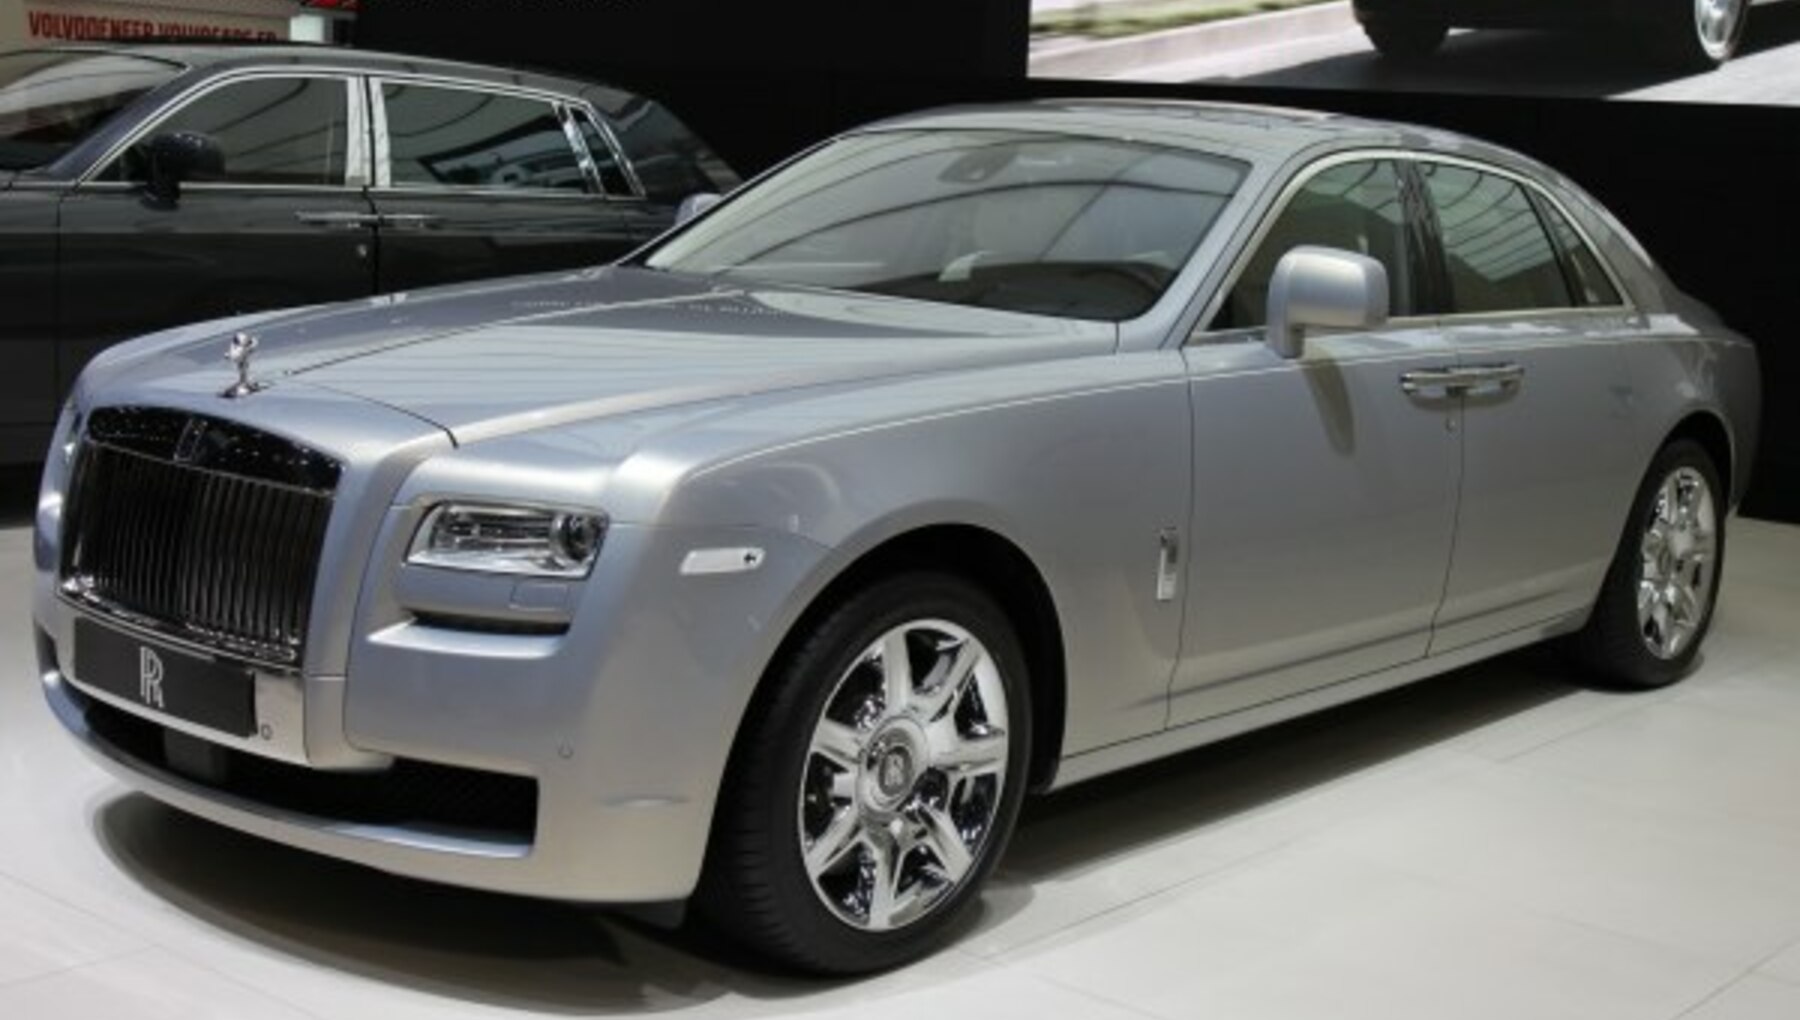 2012 RollsRoyce Ghost for Sale with Photos  CARFAX